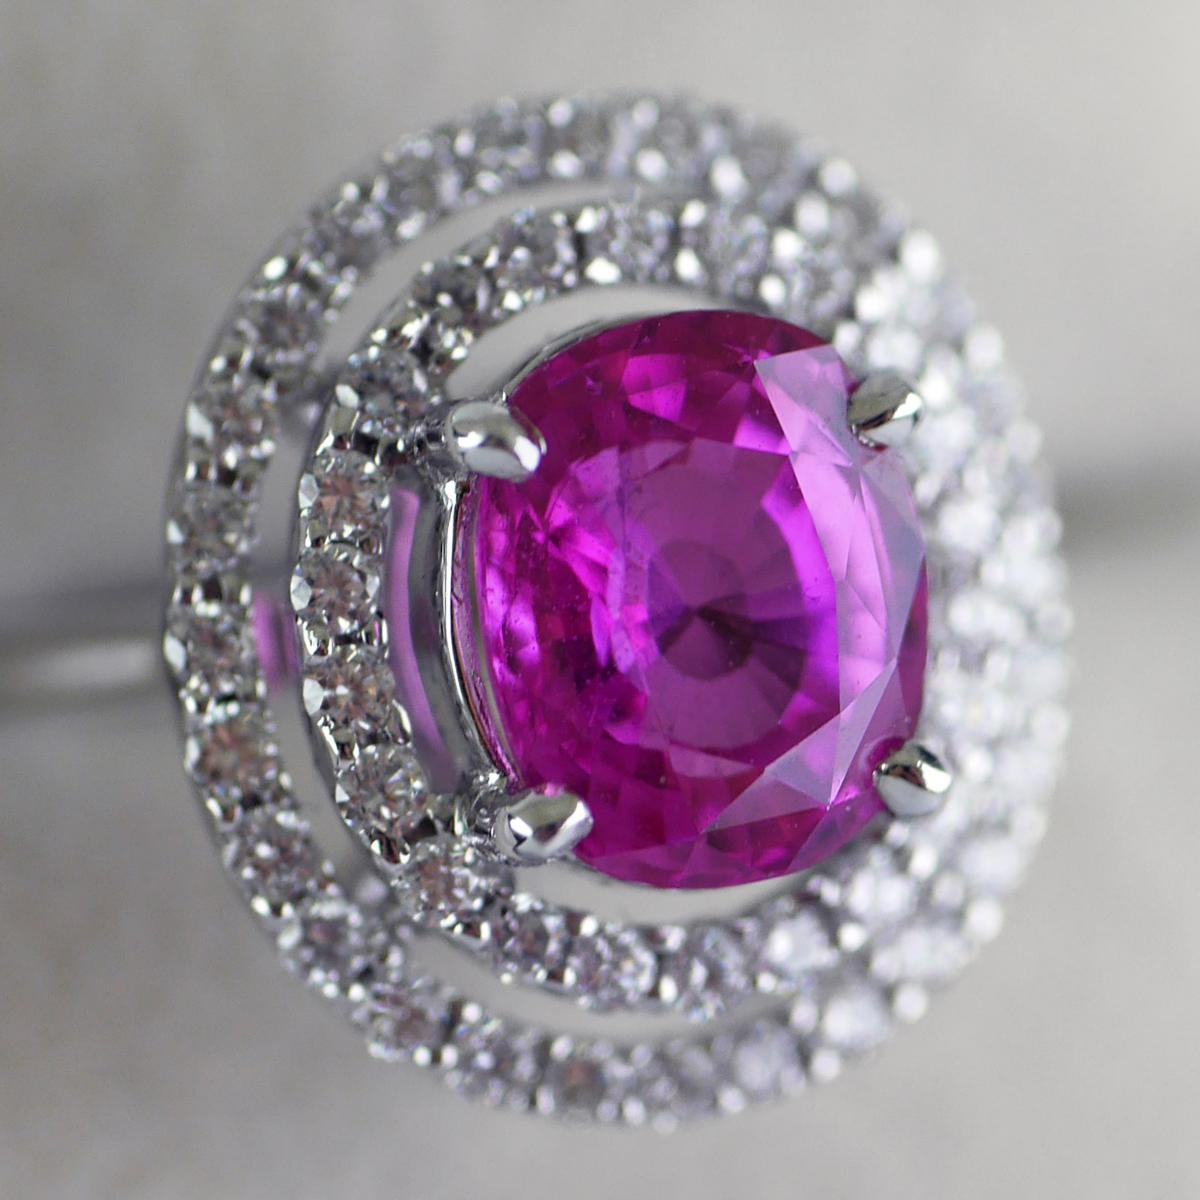 Certified Natural 2.91 Carat Cushion Cut Pink Sapphire and Diamond Ring